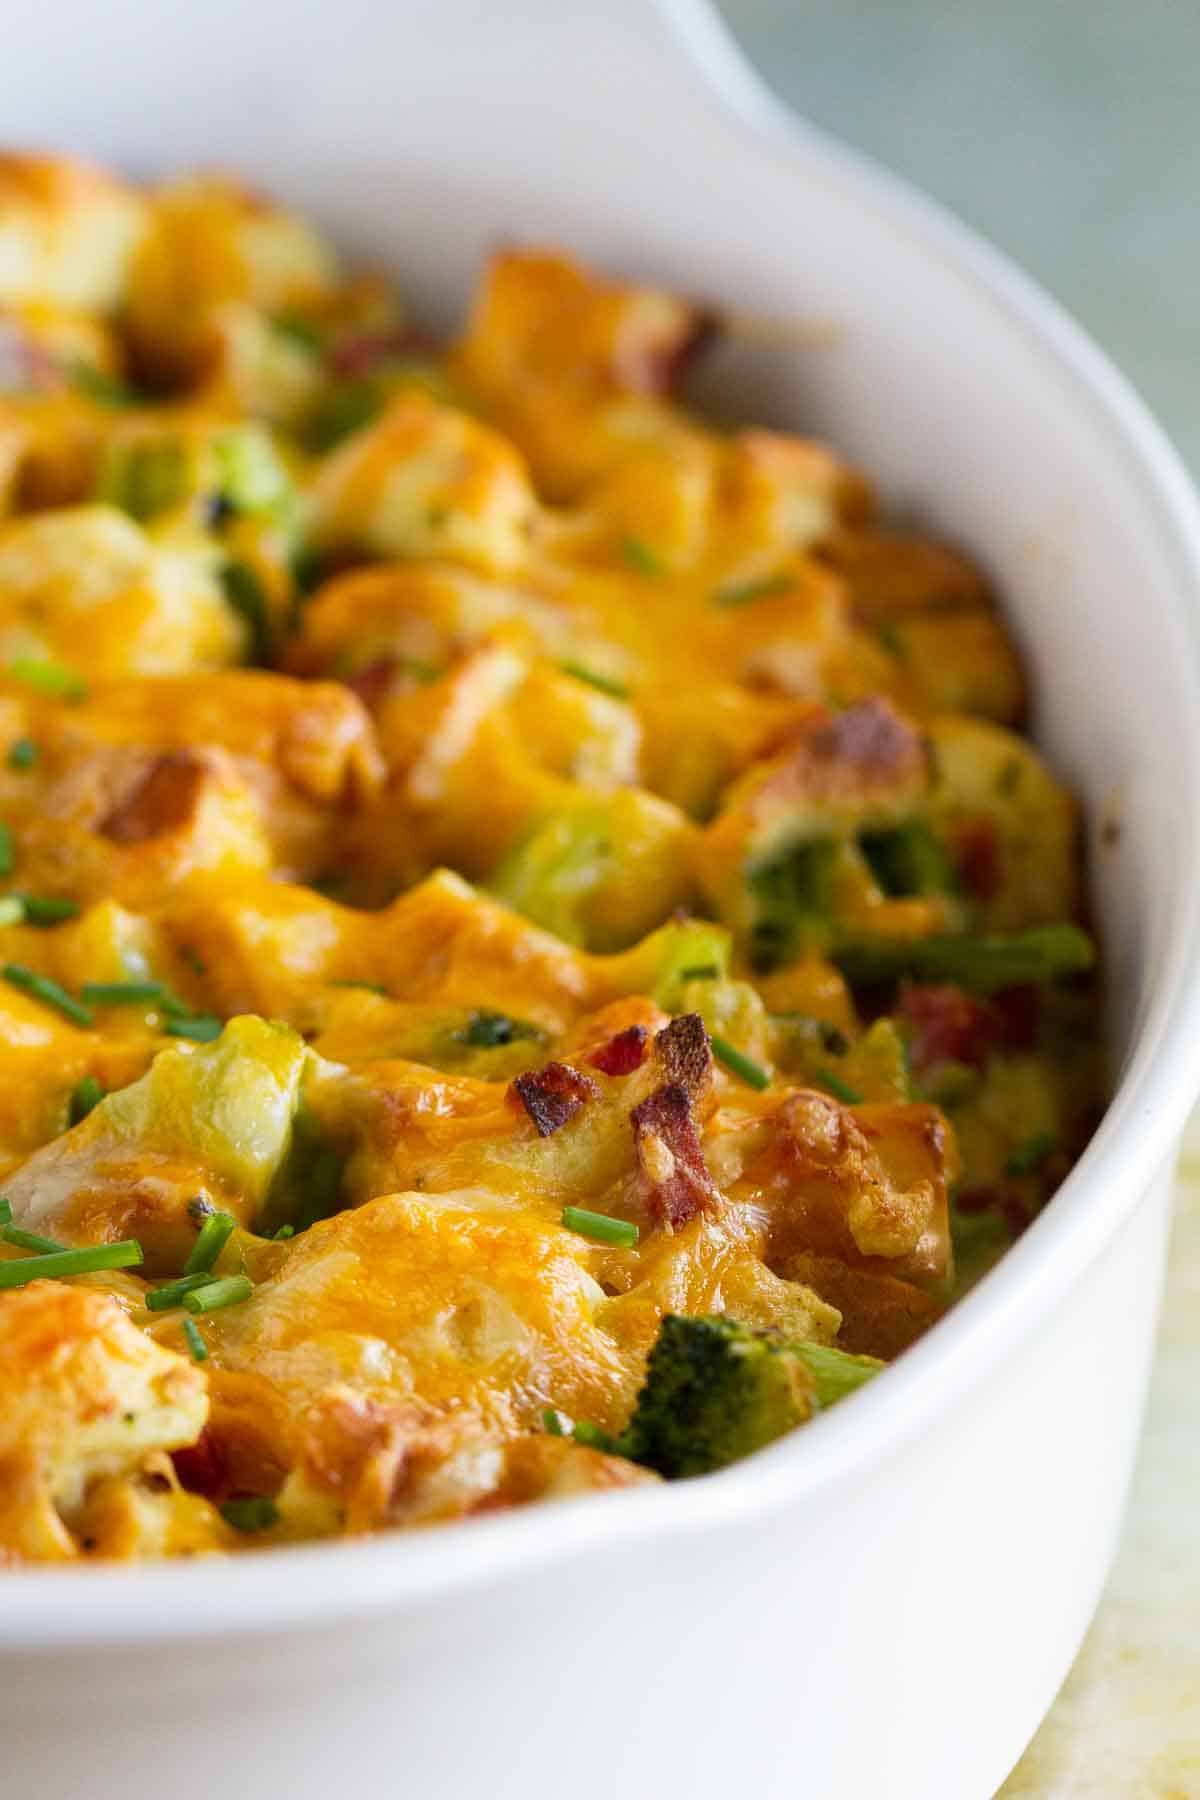 Casserole dish filled with Ham and Cheese Strata with Broccoli.